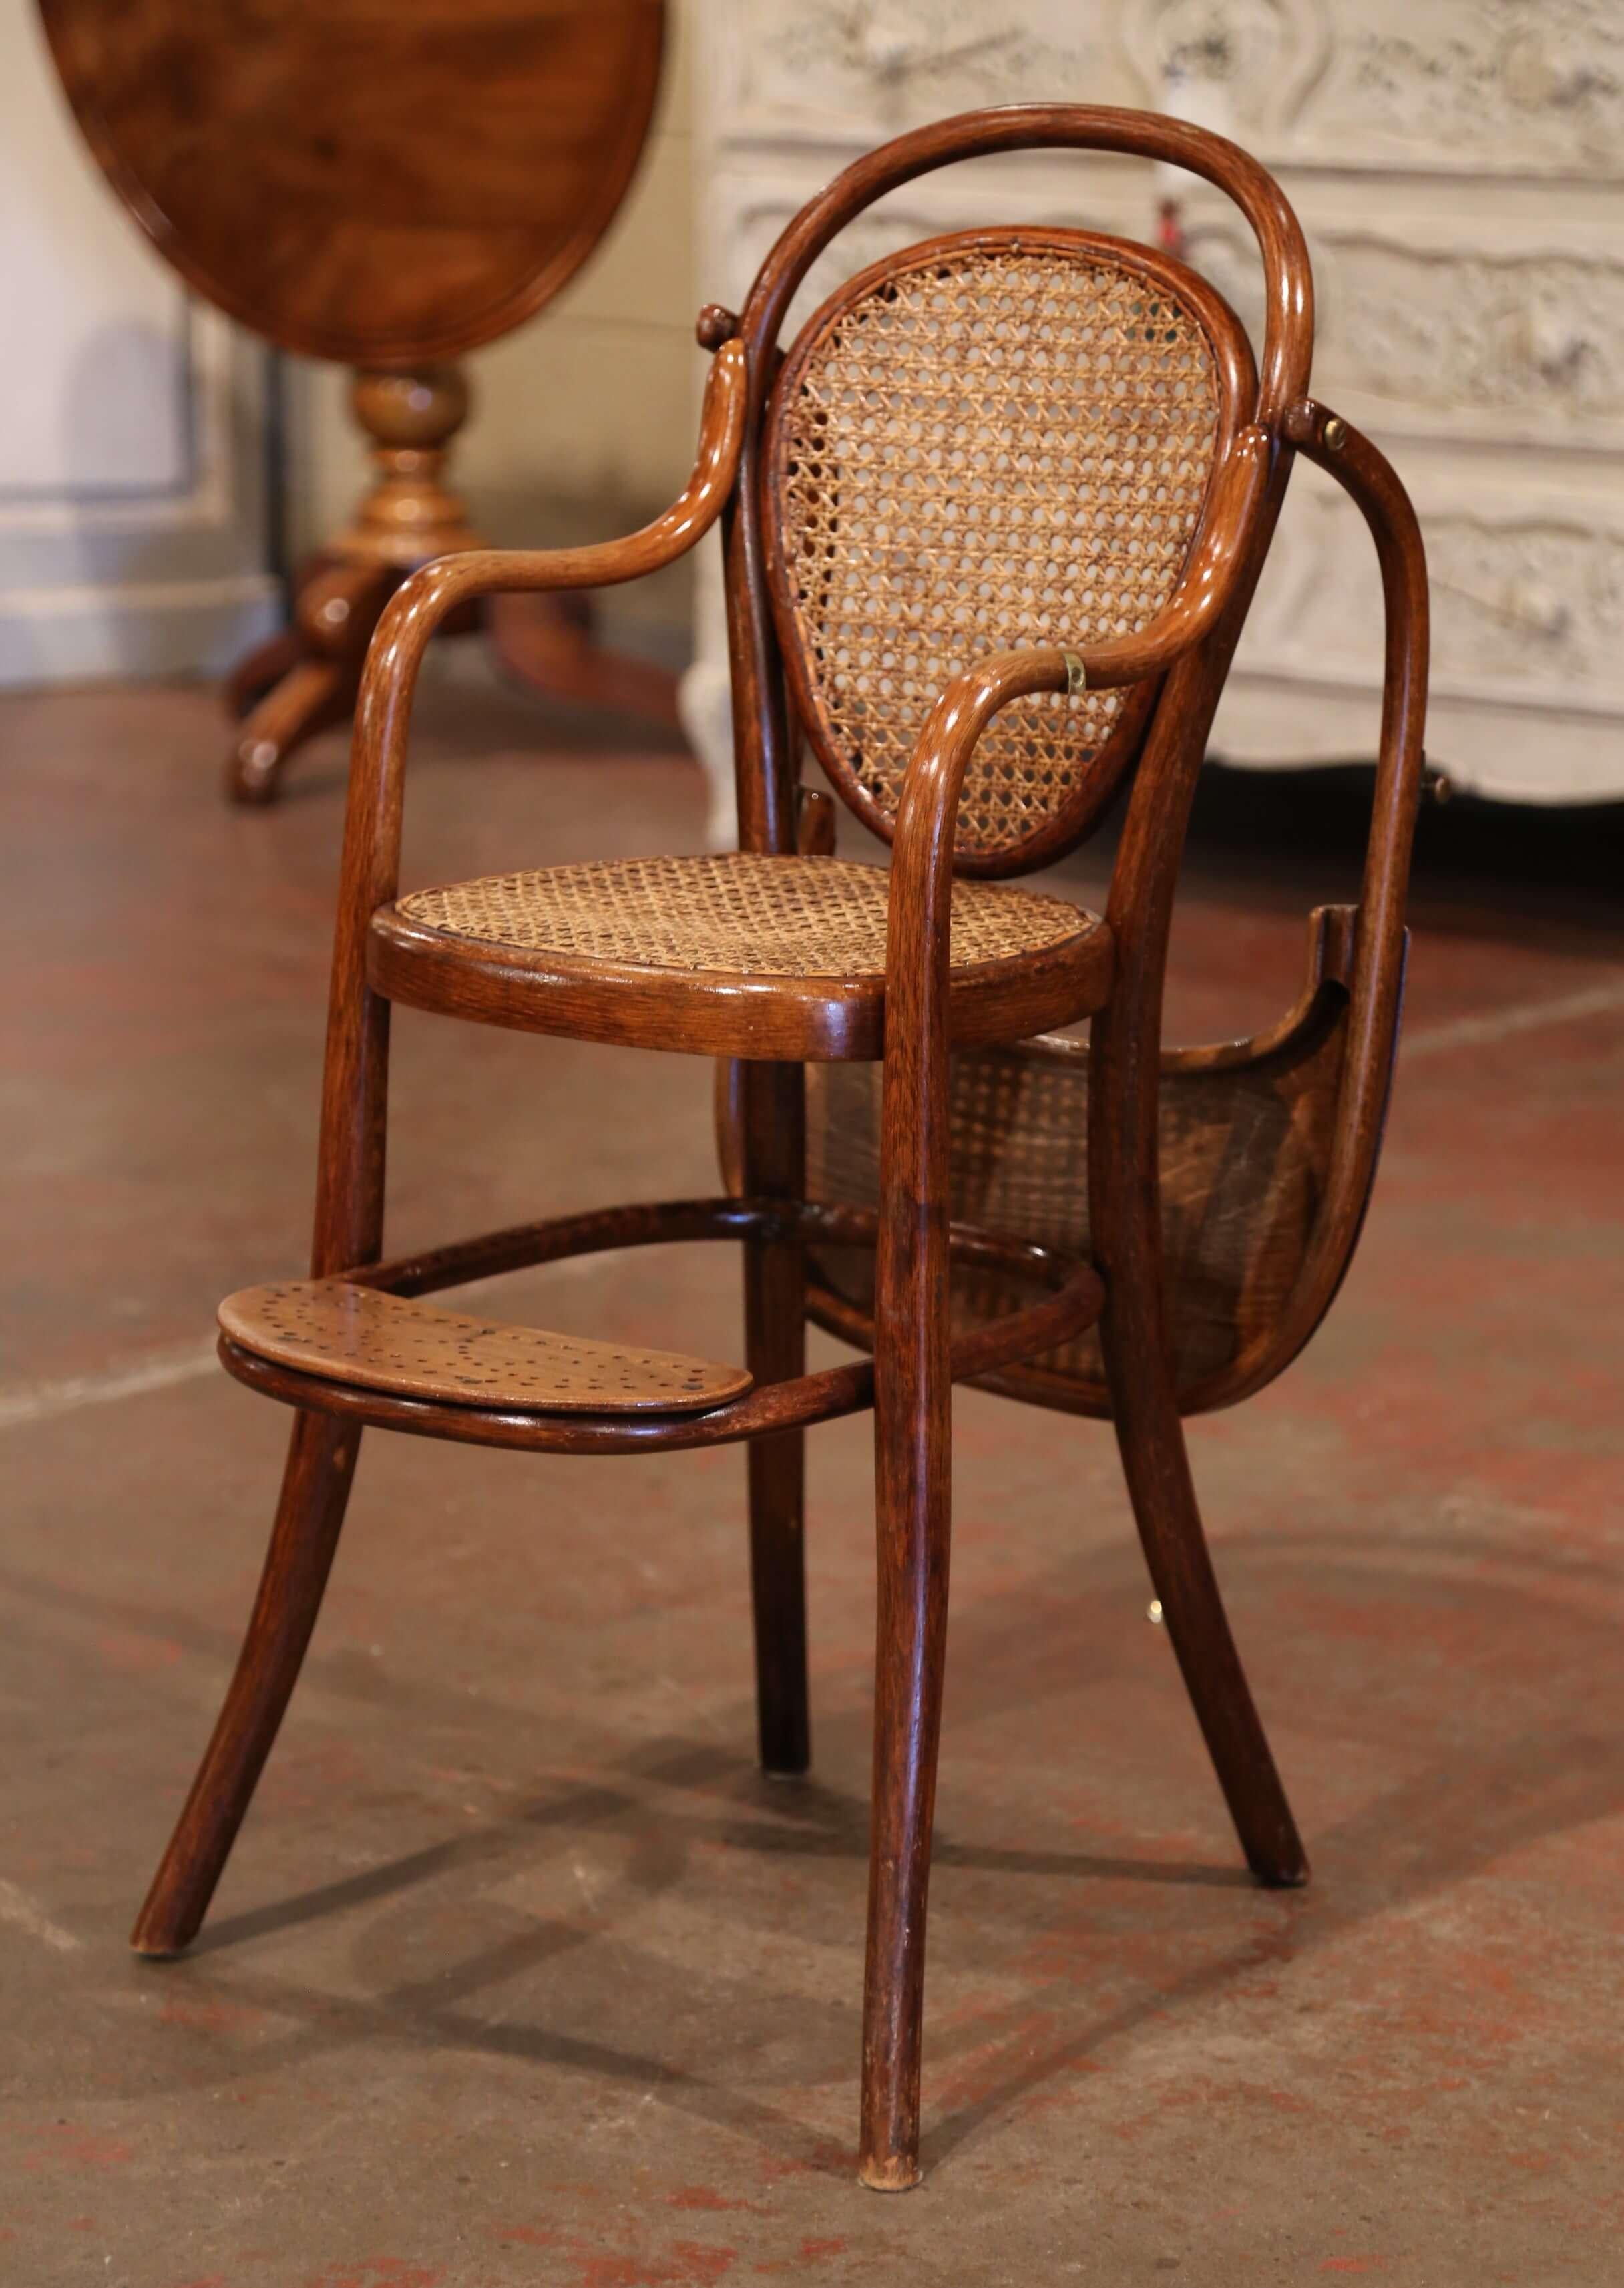 Early 20th Century French Bentwood and Cane High Baby Chair by M. Thonet For Sale 2